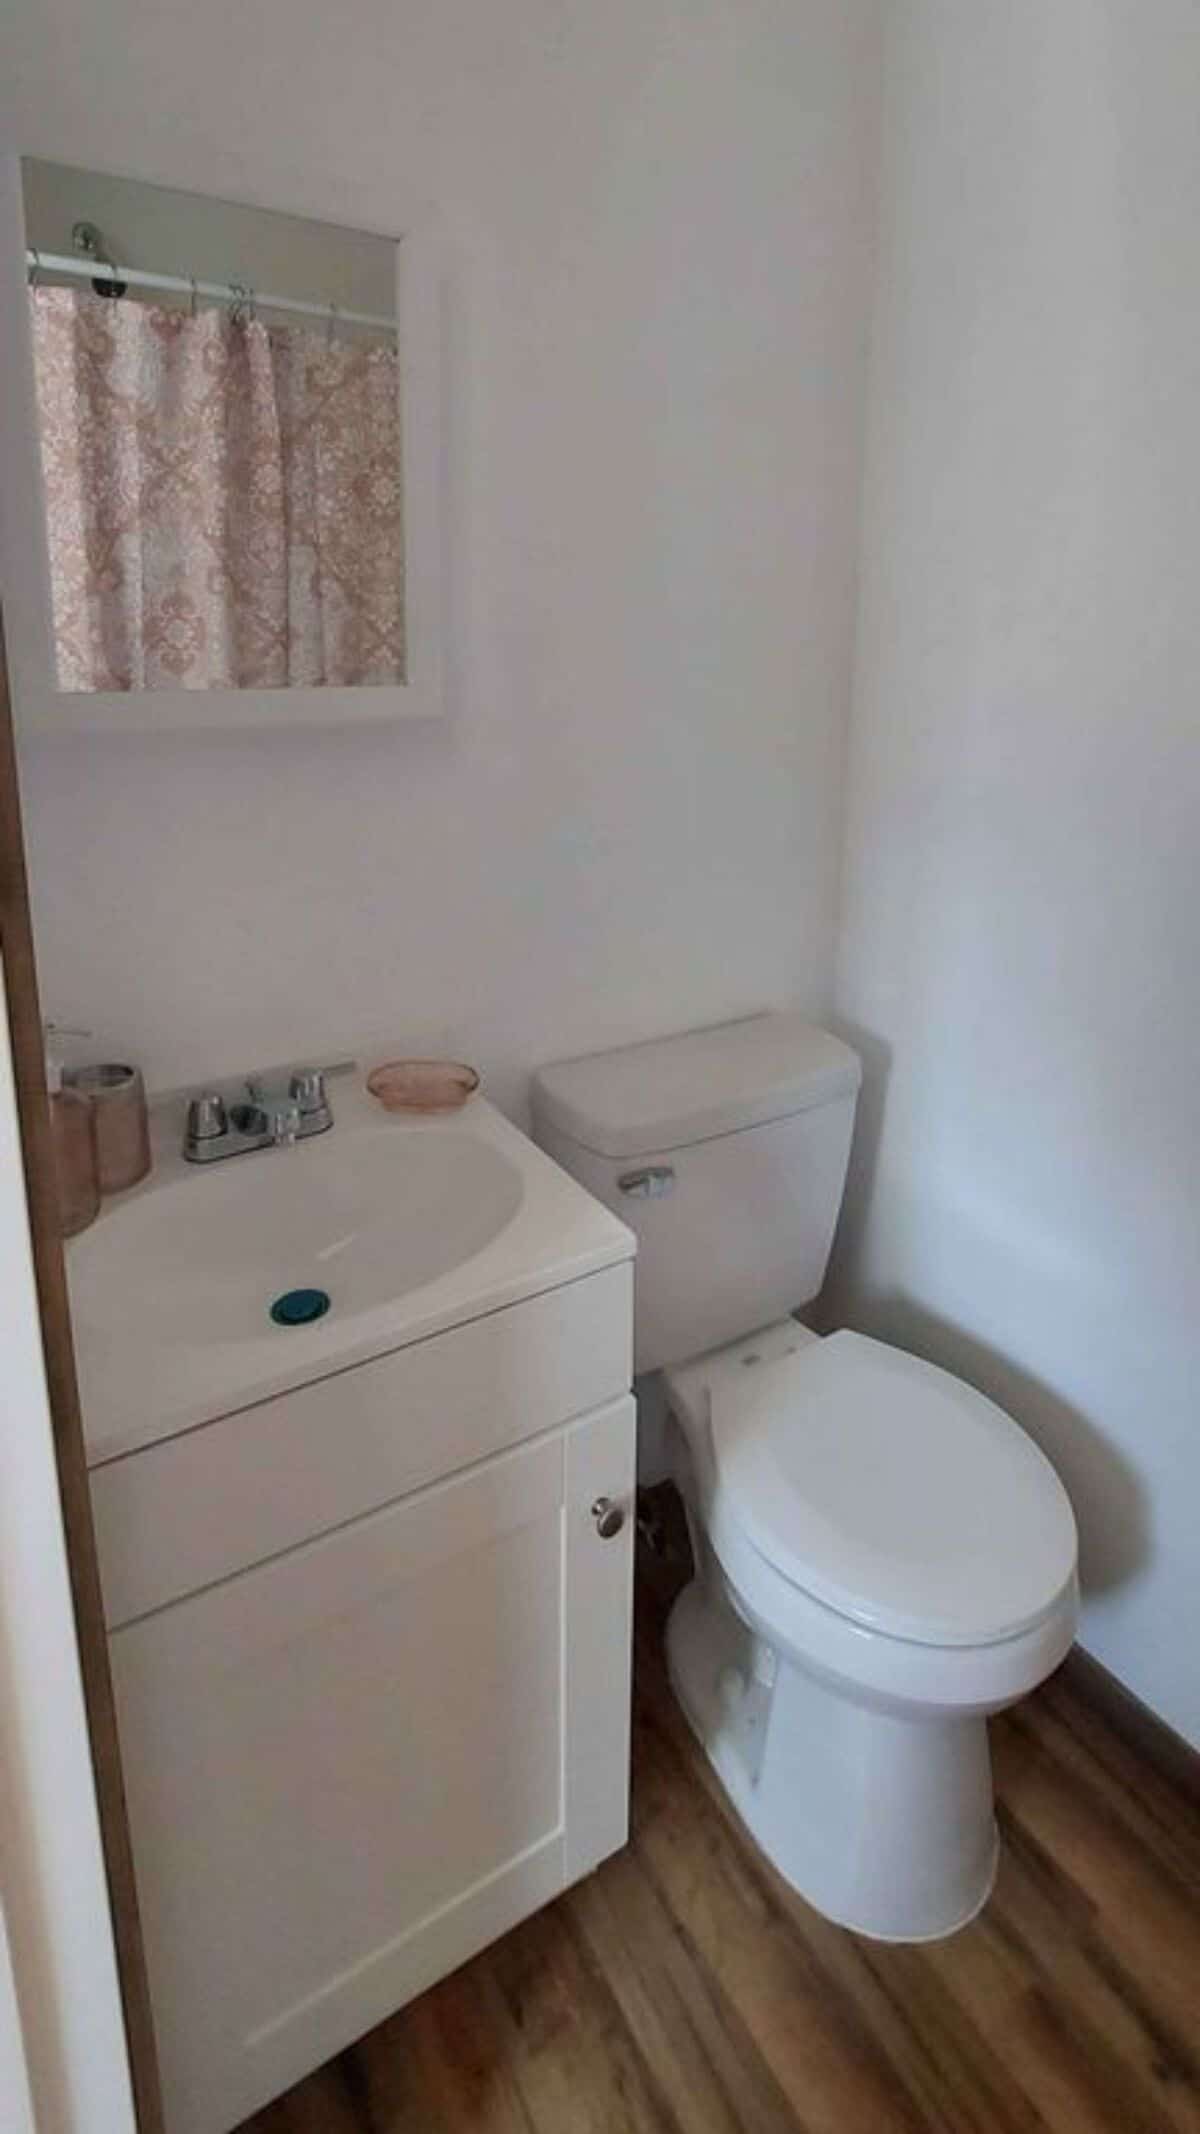 Sink with vanity and toilet area of 20' Tiny House